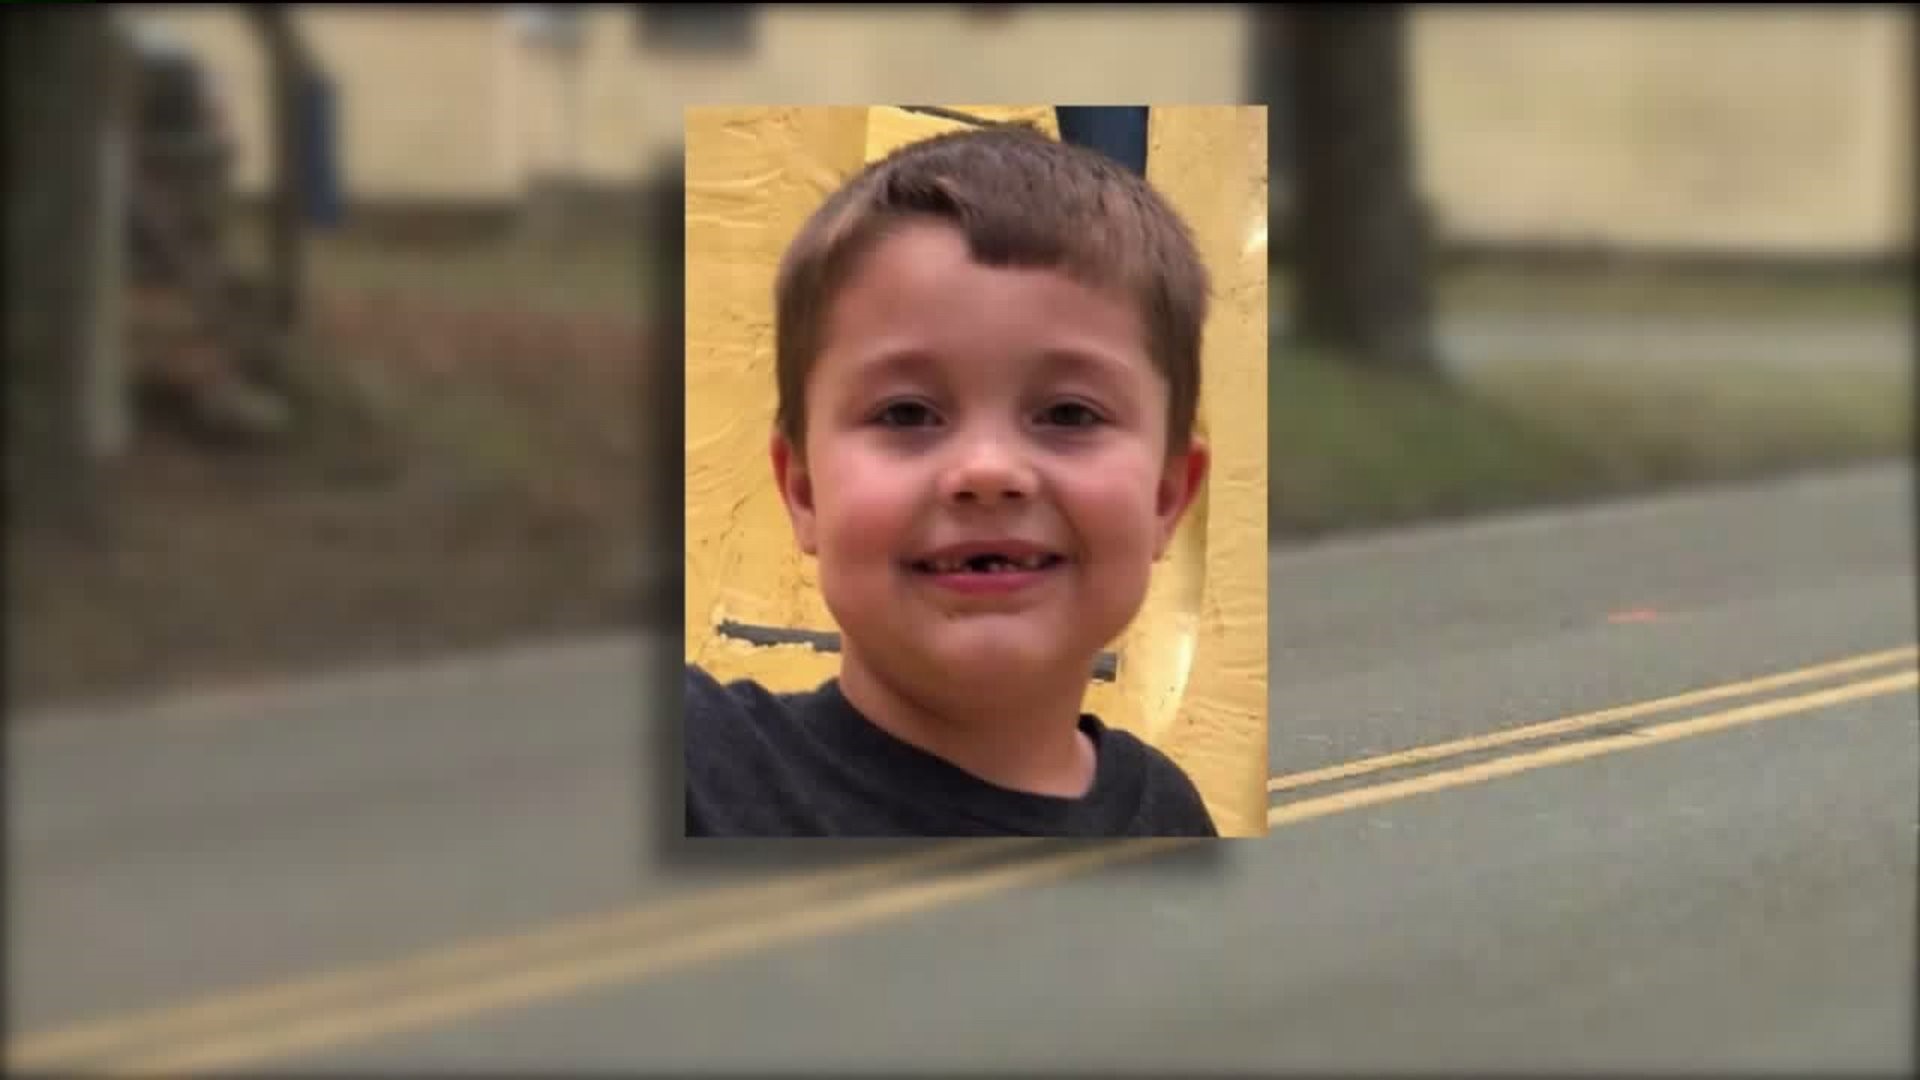 Account for Child Hit and Killed in Columbia County Surpasses Goal